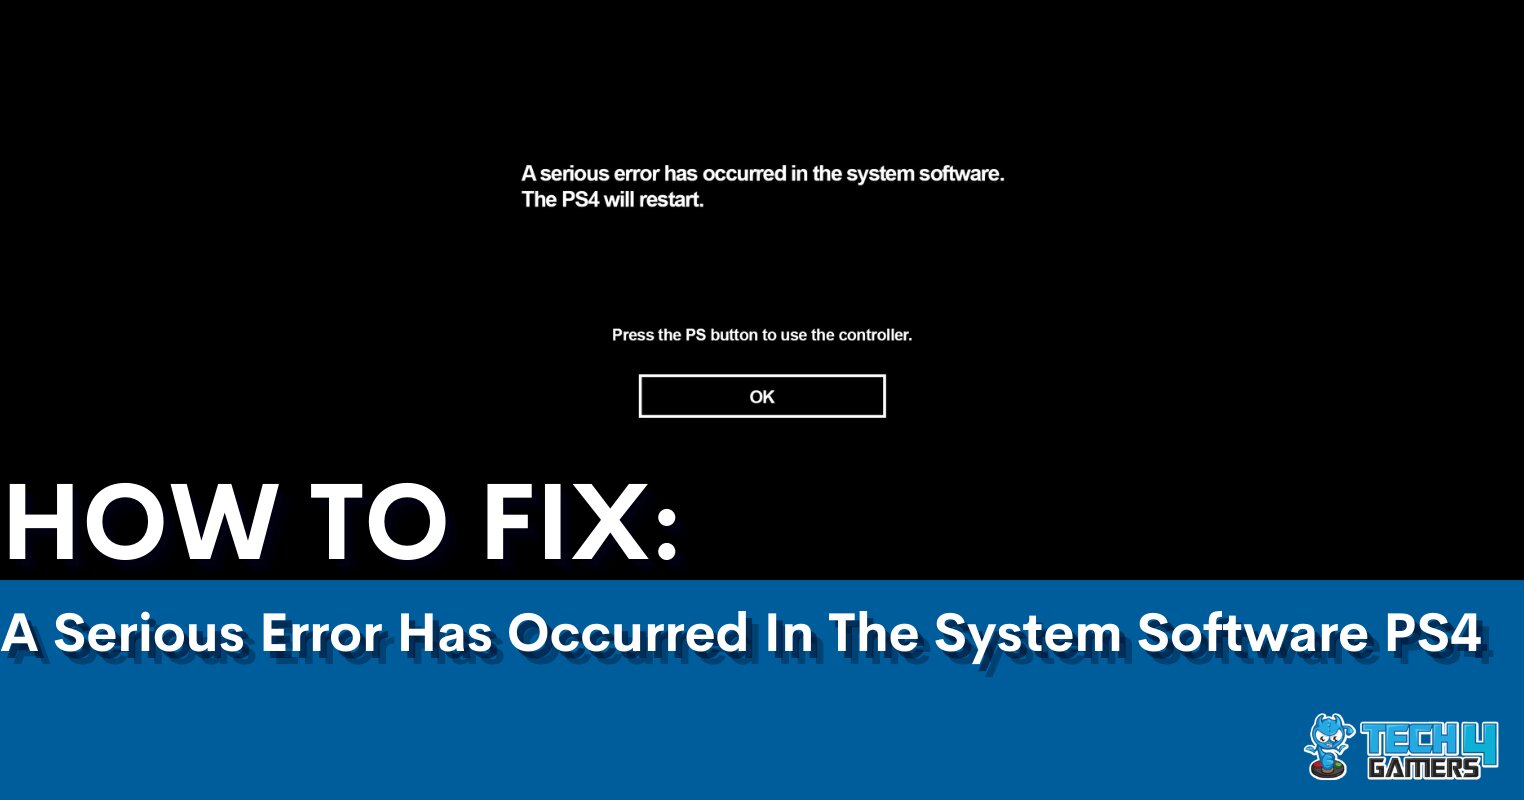 A Serious Error Has Occurred In The System Software PS4